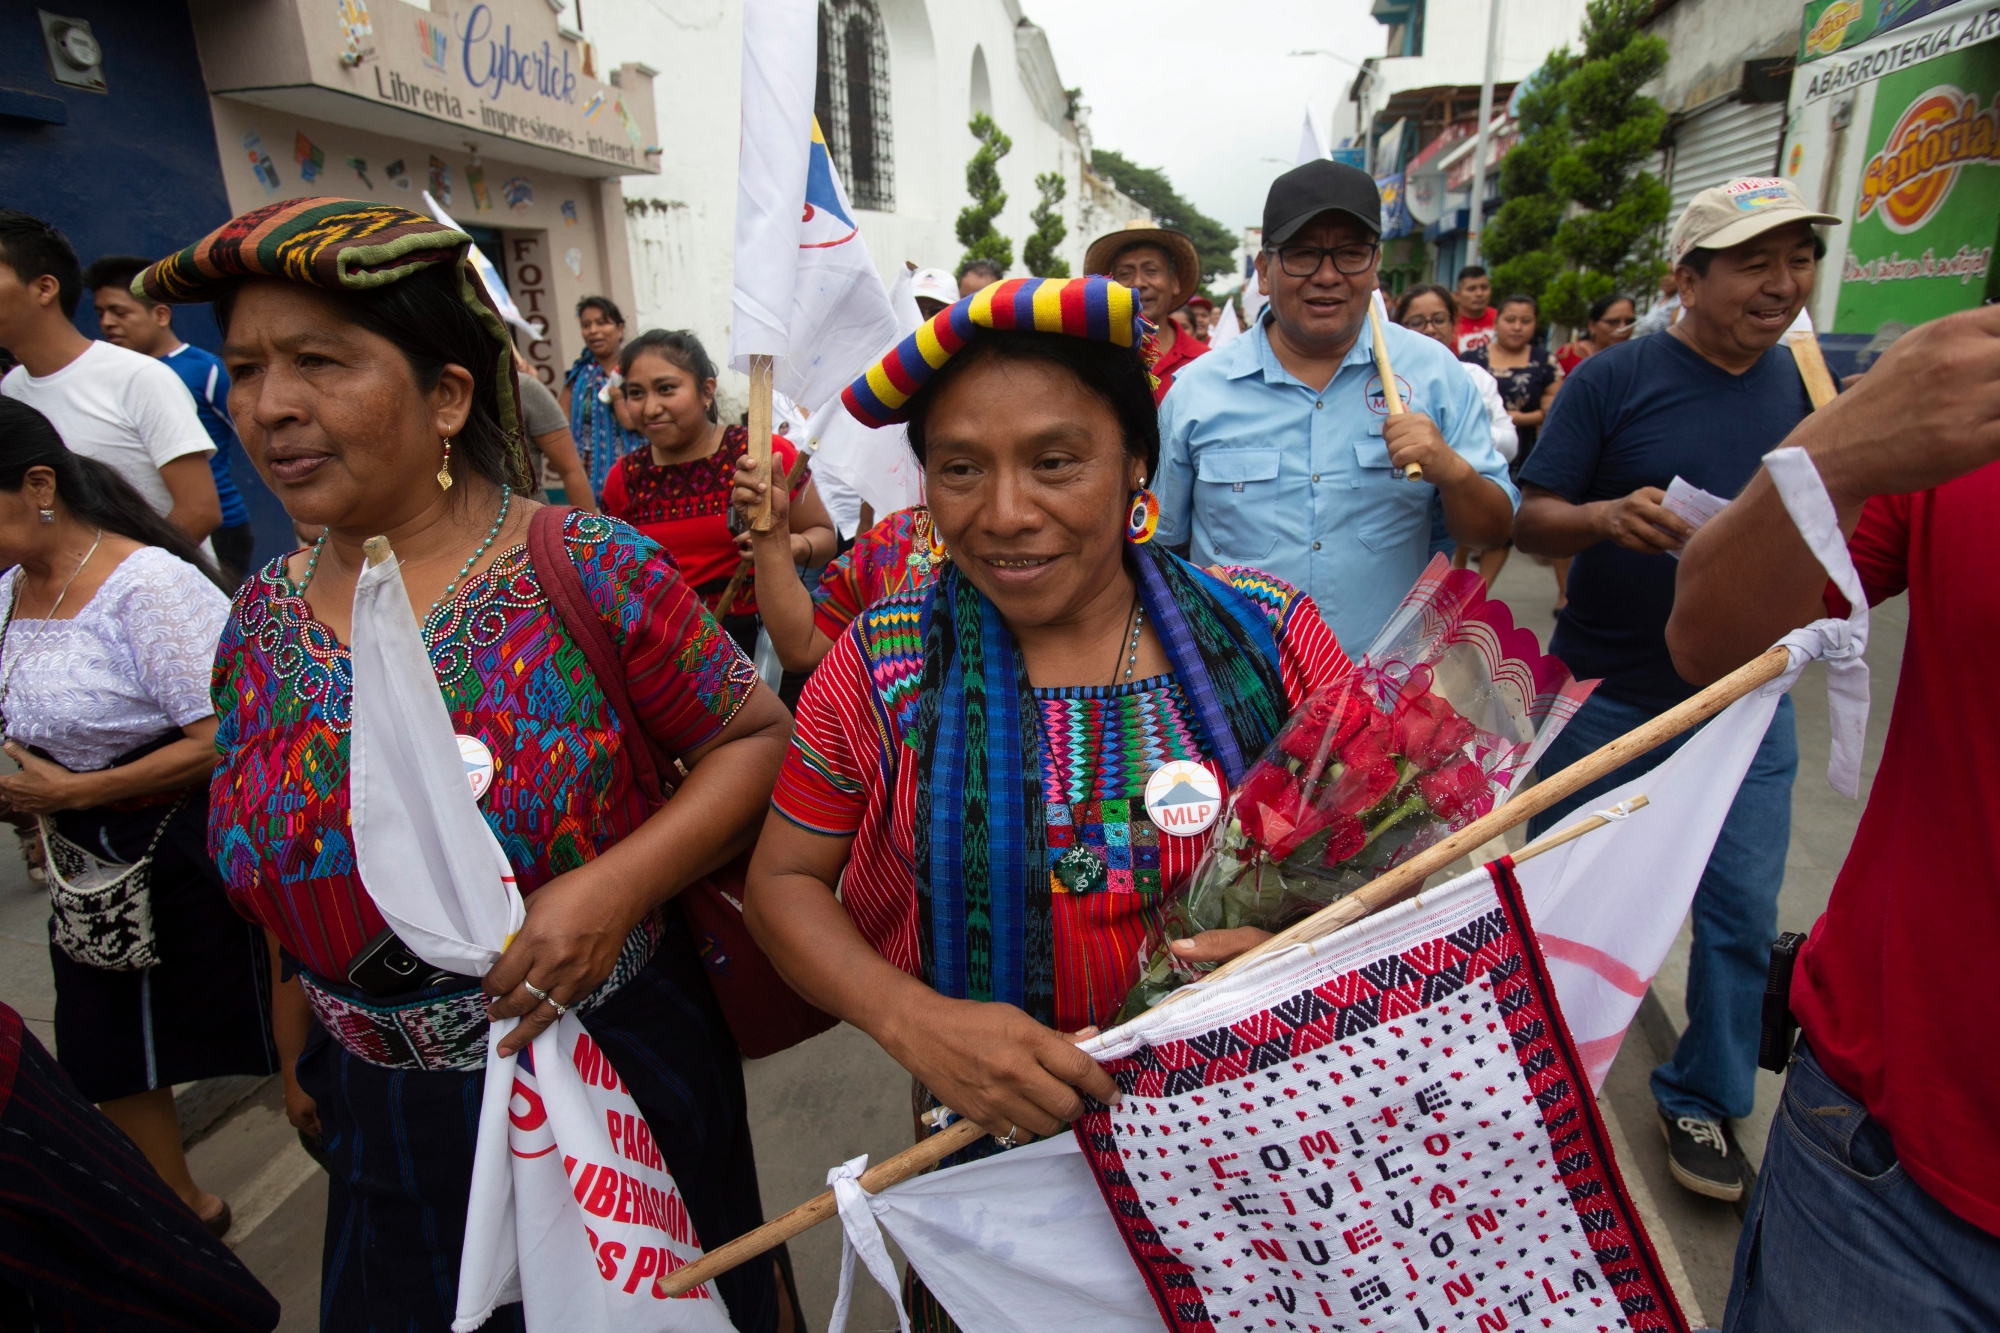 In this June 12, 2019 photo, Thelma Cabrera, presidential candidate of the Movement for the Liberation of the People, MLP, campaigns in Palin, Guatemala. Guatemala will hold general elections on June 16. (AP Photo/Moises Castillo) The Week That Was in Latin America Photo Gallery